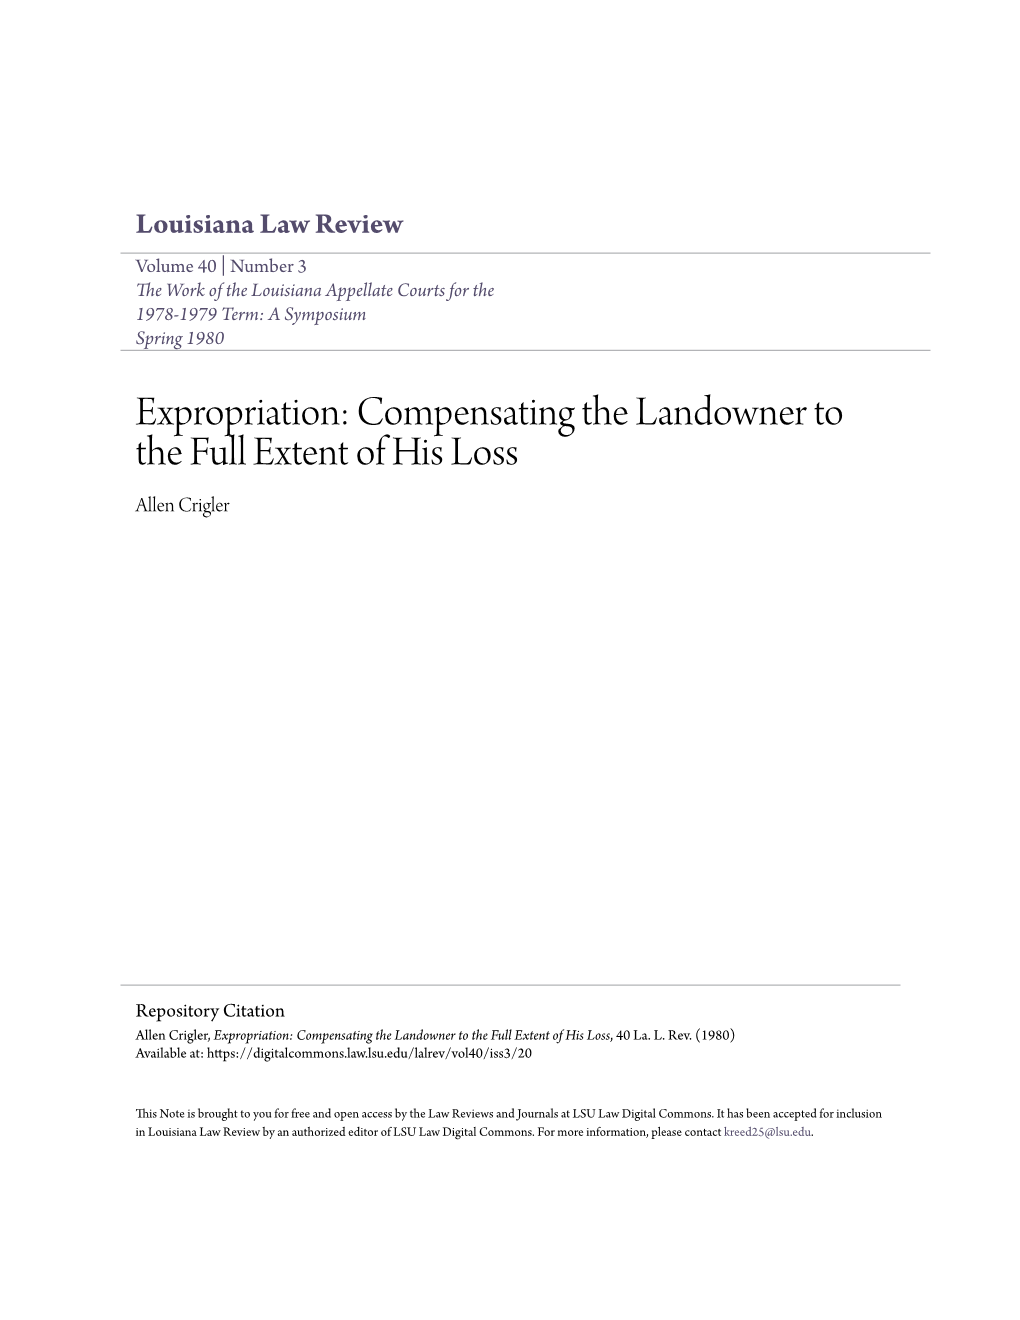 Expropriation: Compensating the Landowner to the Full Extent of His Loss Allen Crigler